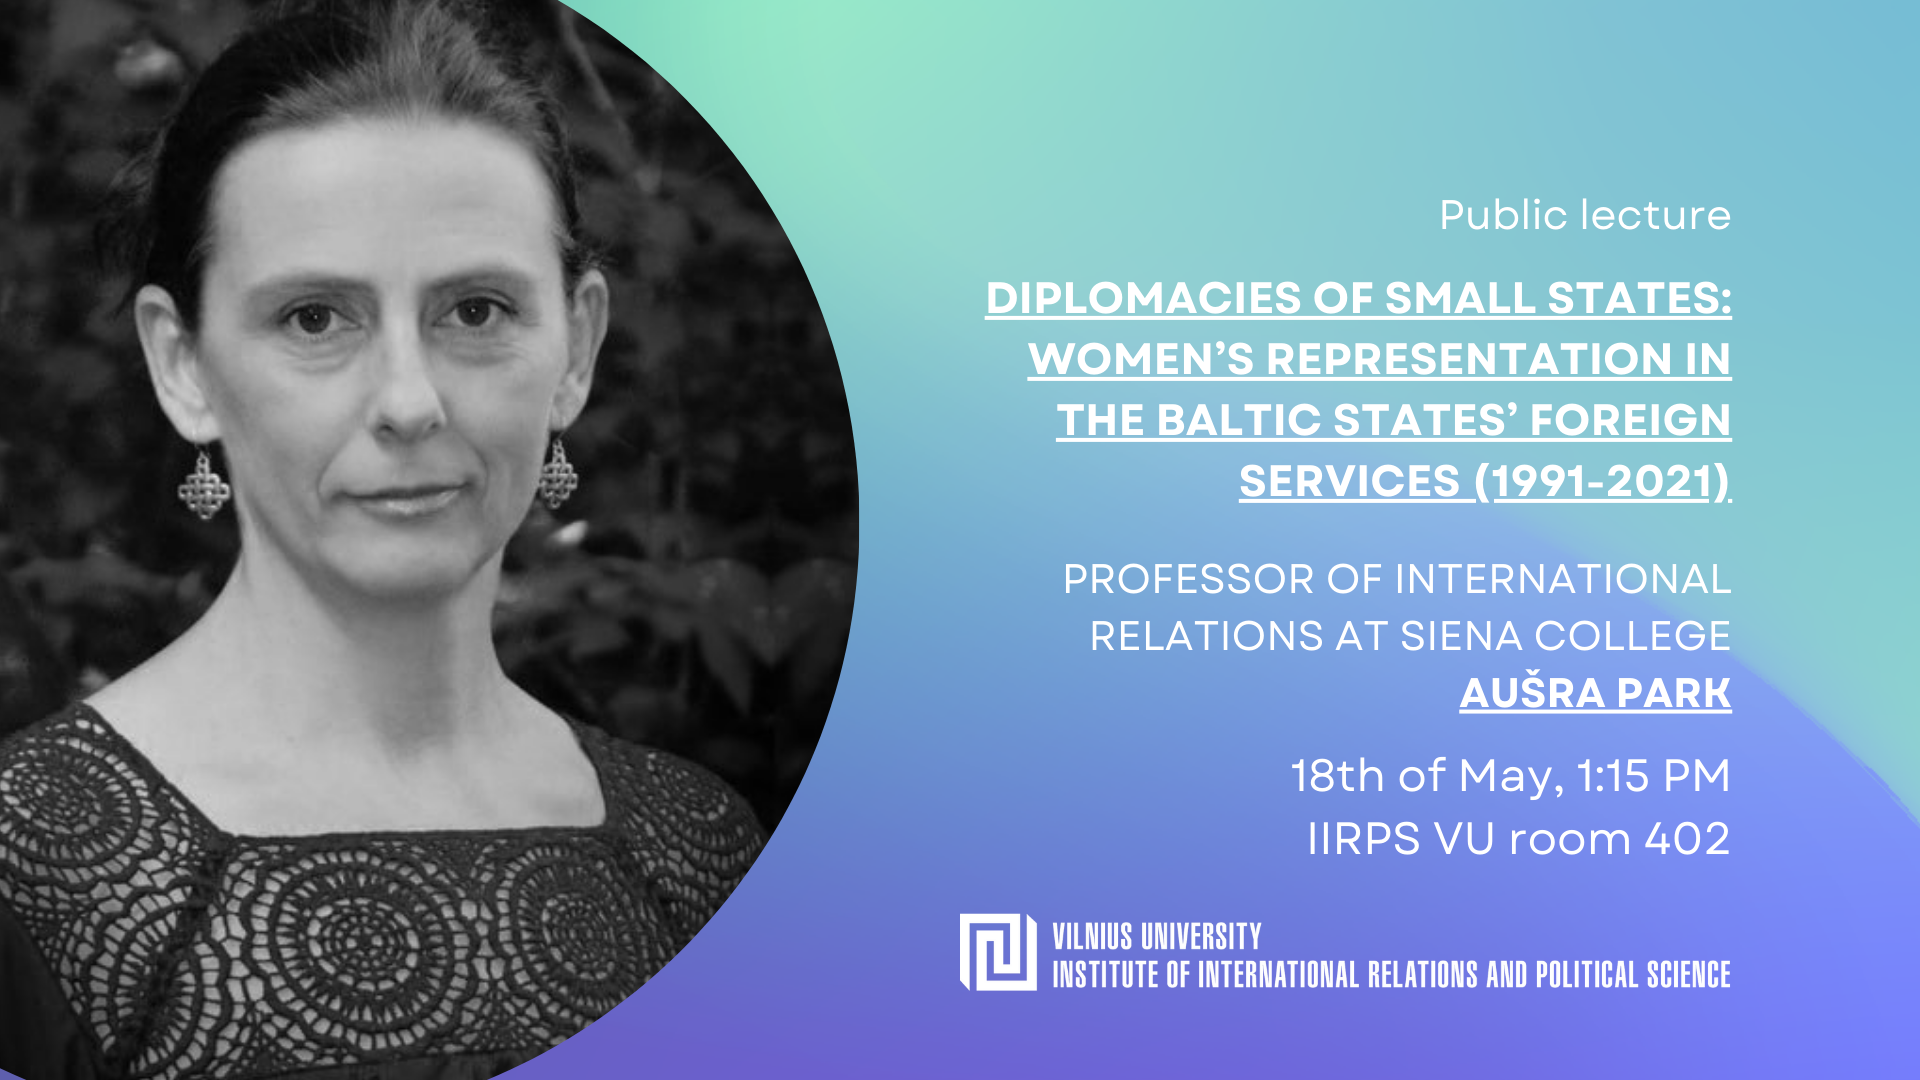 Diplomacies of Small States: Women’s Representation in the Baltic States’ Foreign Services